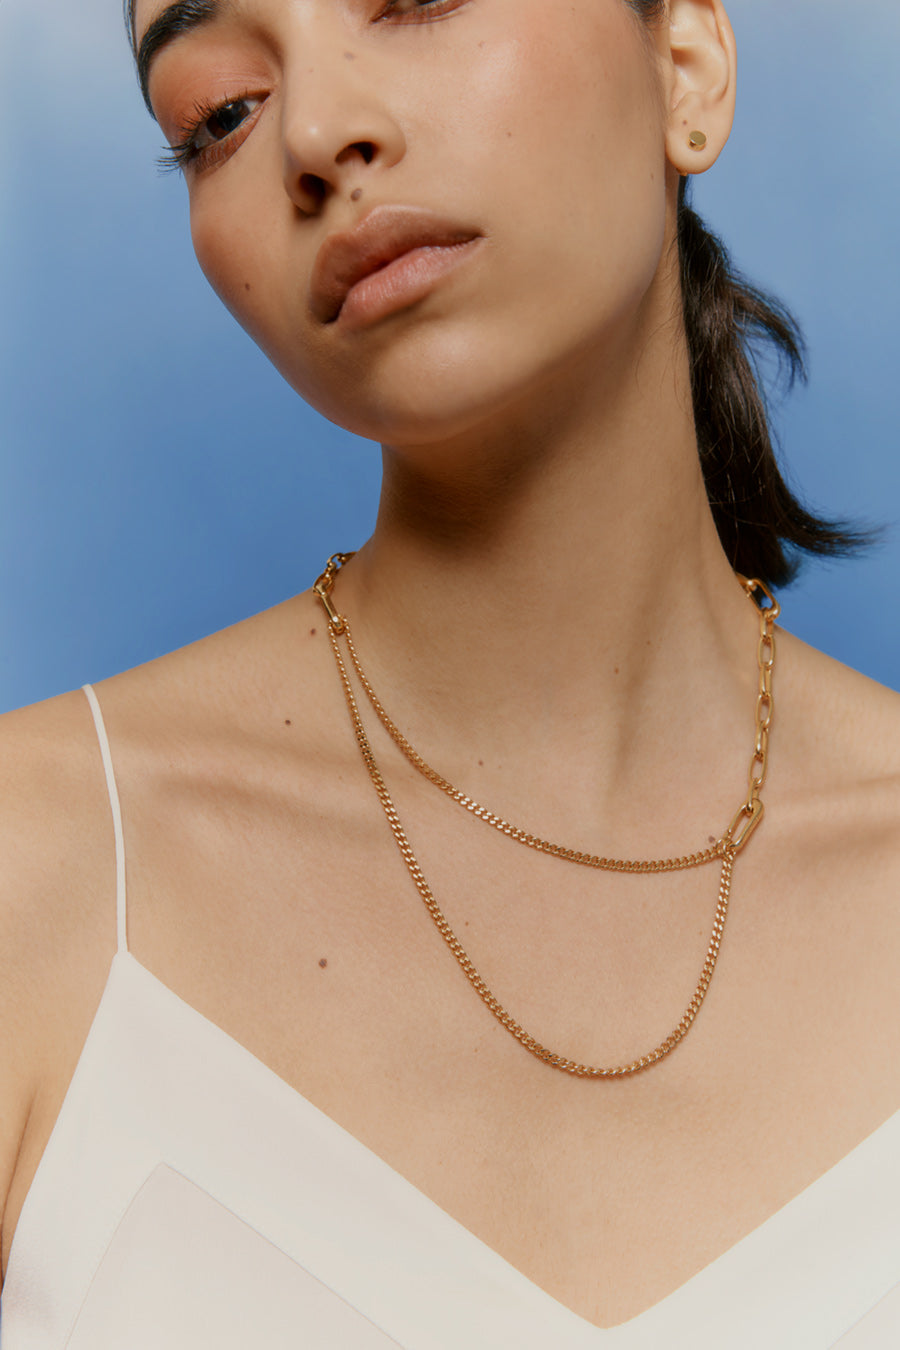 Close-up of a woman wearing a layered necklace and a top with thin straps.